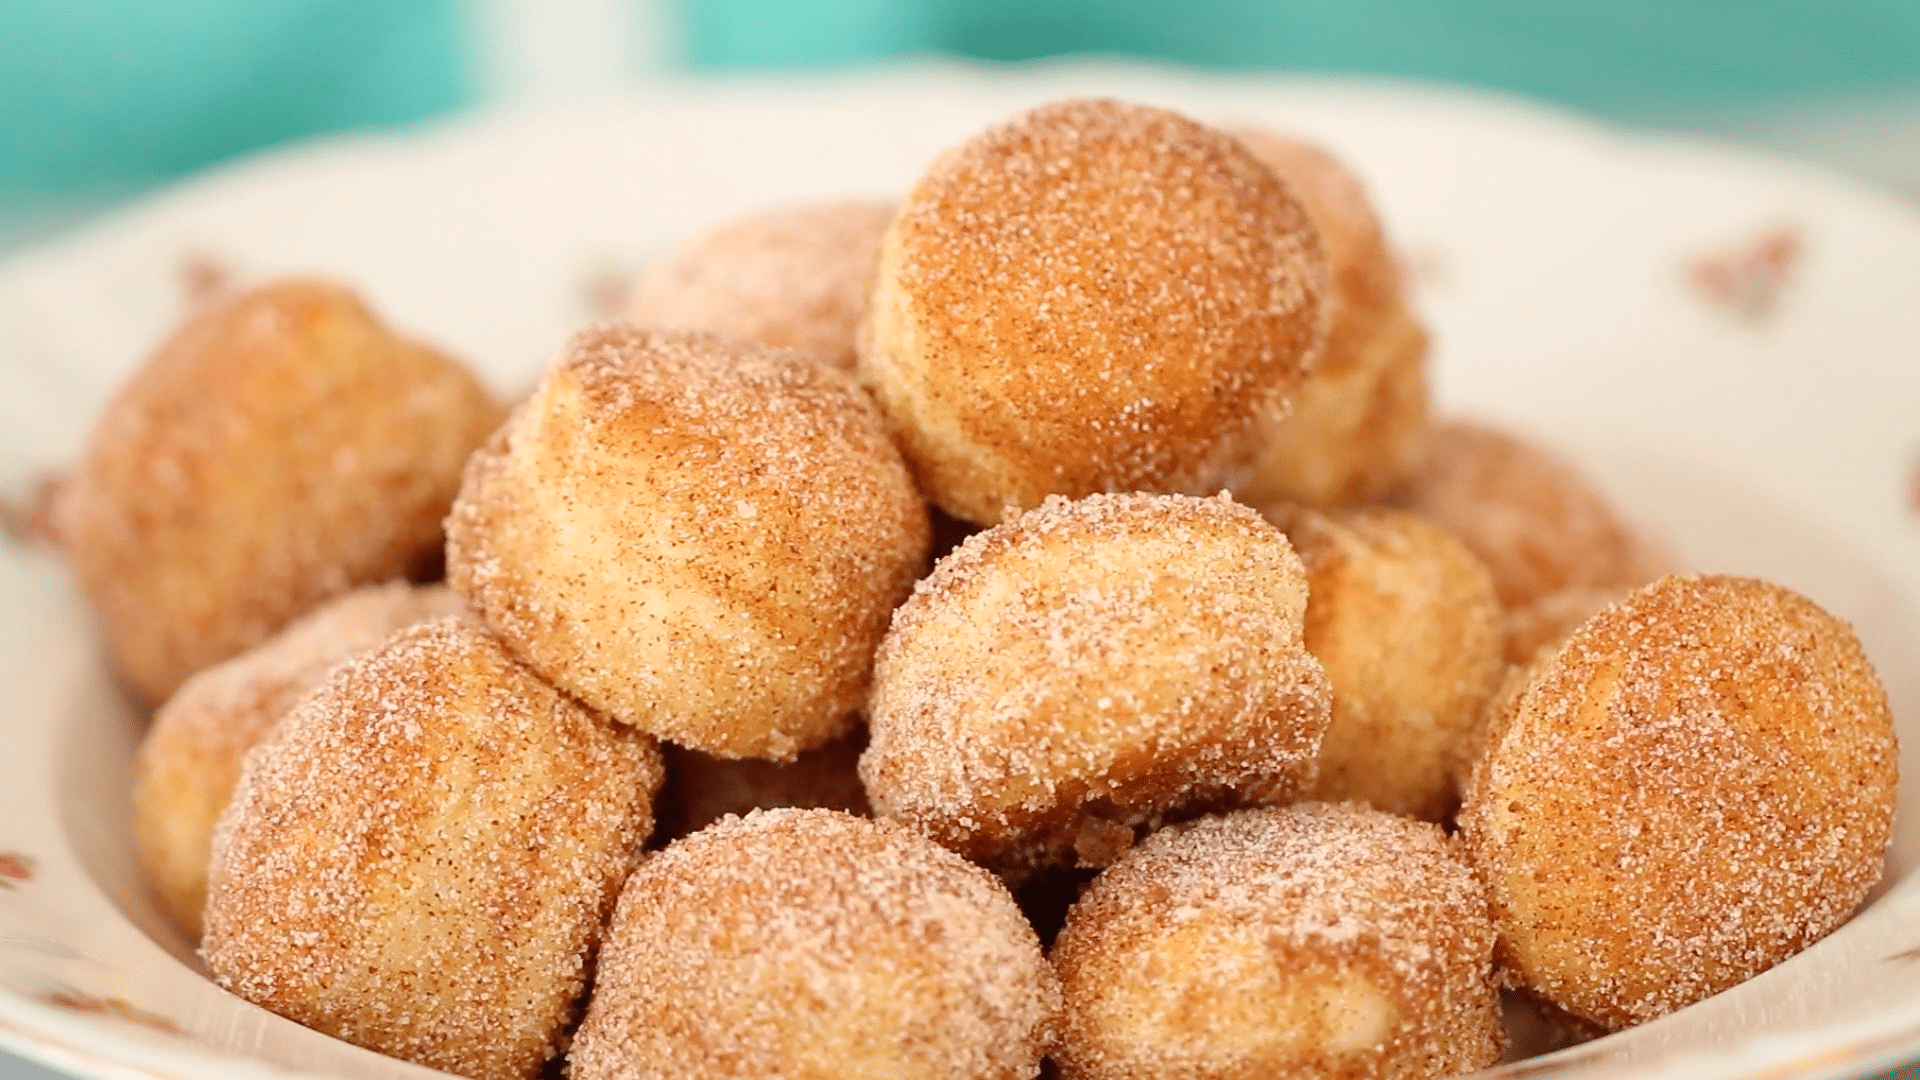 A pile of baked homemade donuts covered in cinnamon sugar.